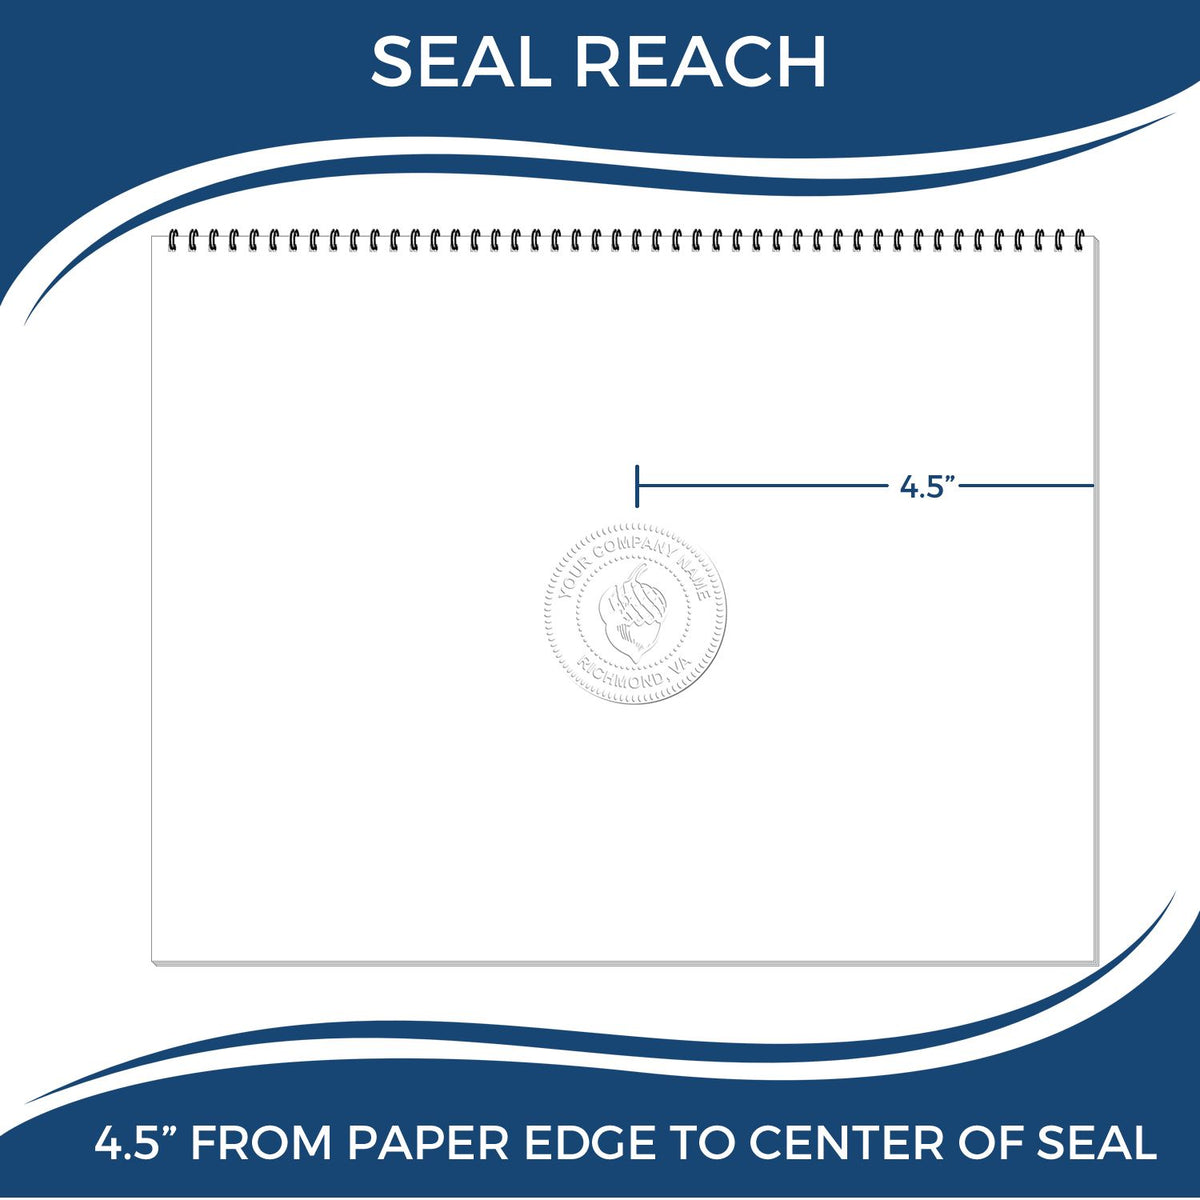 An infographic showing the seal reach which is represented by a ruler and a miniature seal image of the State of Nevada Extended Long Reach Engineer Seal